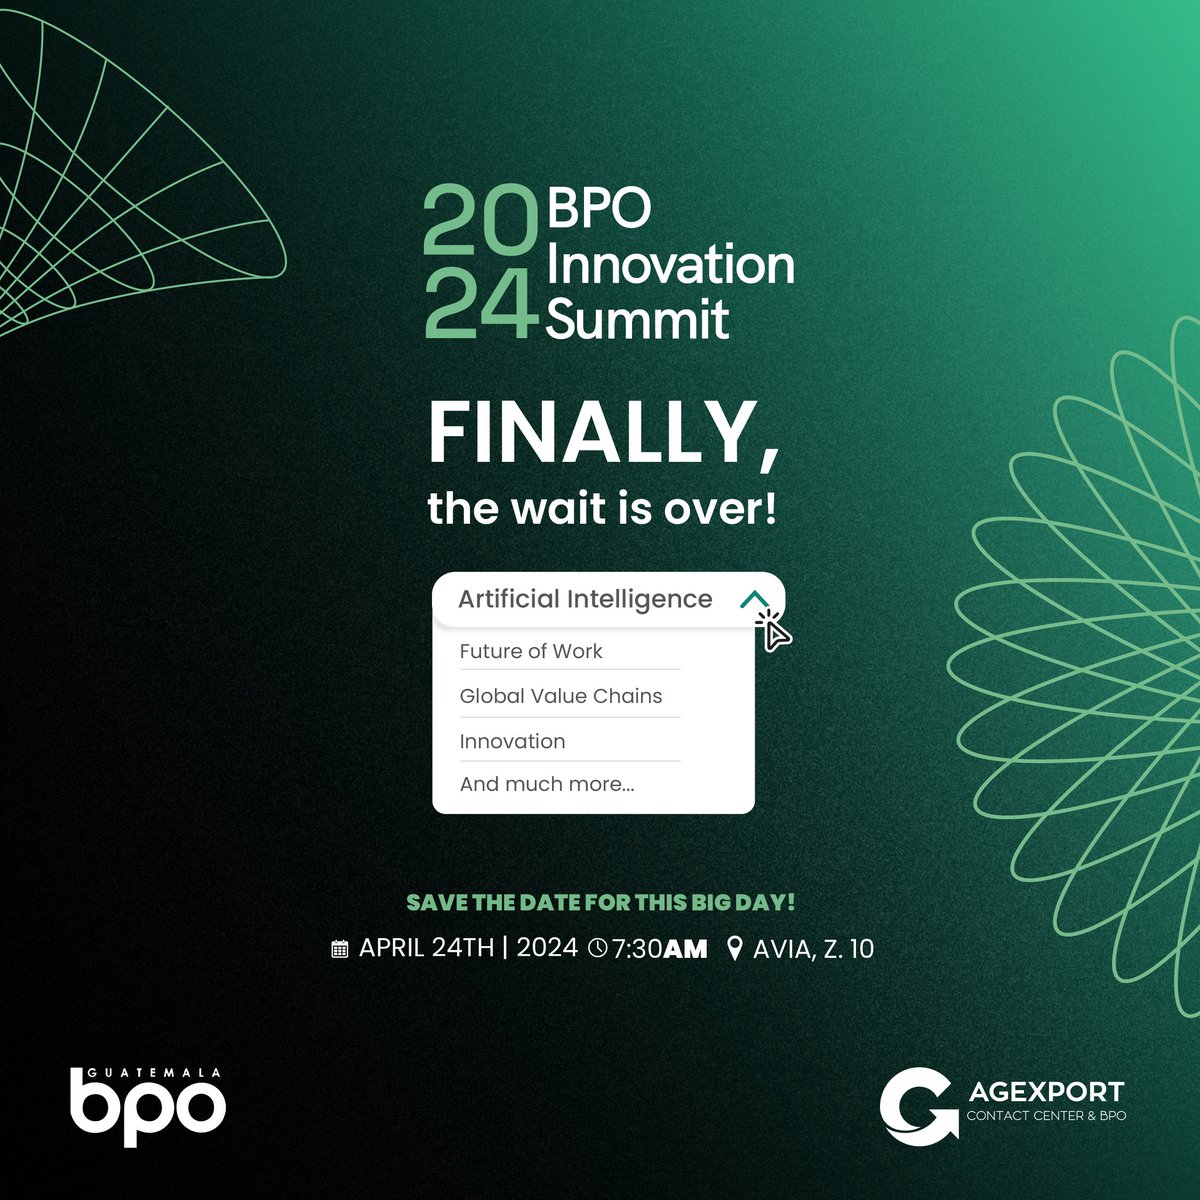 The long-awaited moment has arrived, and innovation is here to stay. ✨ Thank you for being part of the Guatemala BPO INNOVATION SUMMIT on April 24th at 7:30 AM at AVIA! #InnovationInMotion